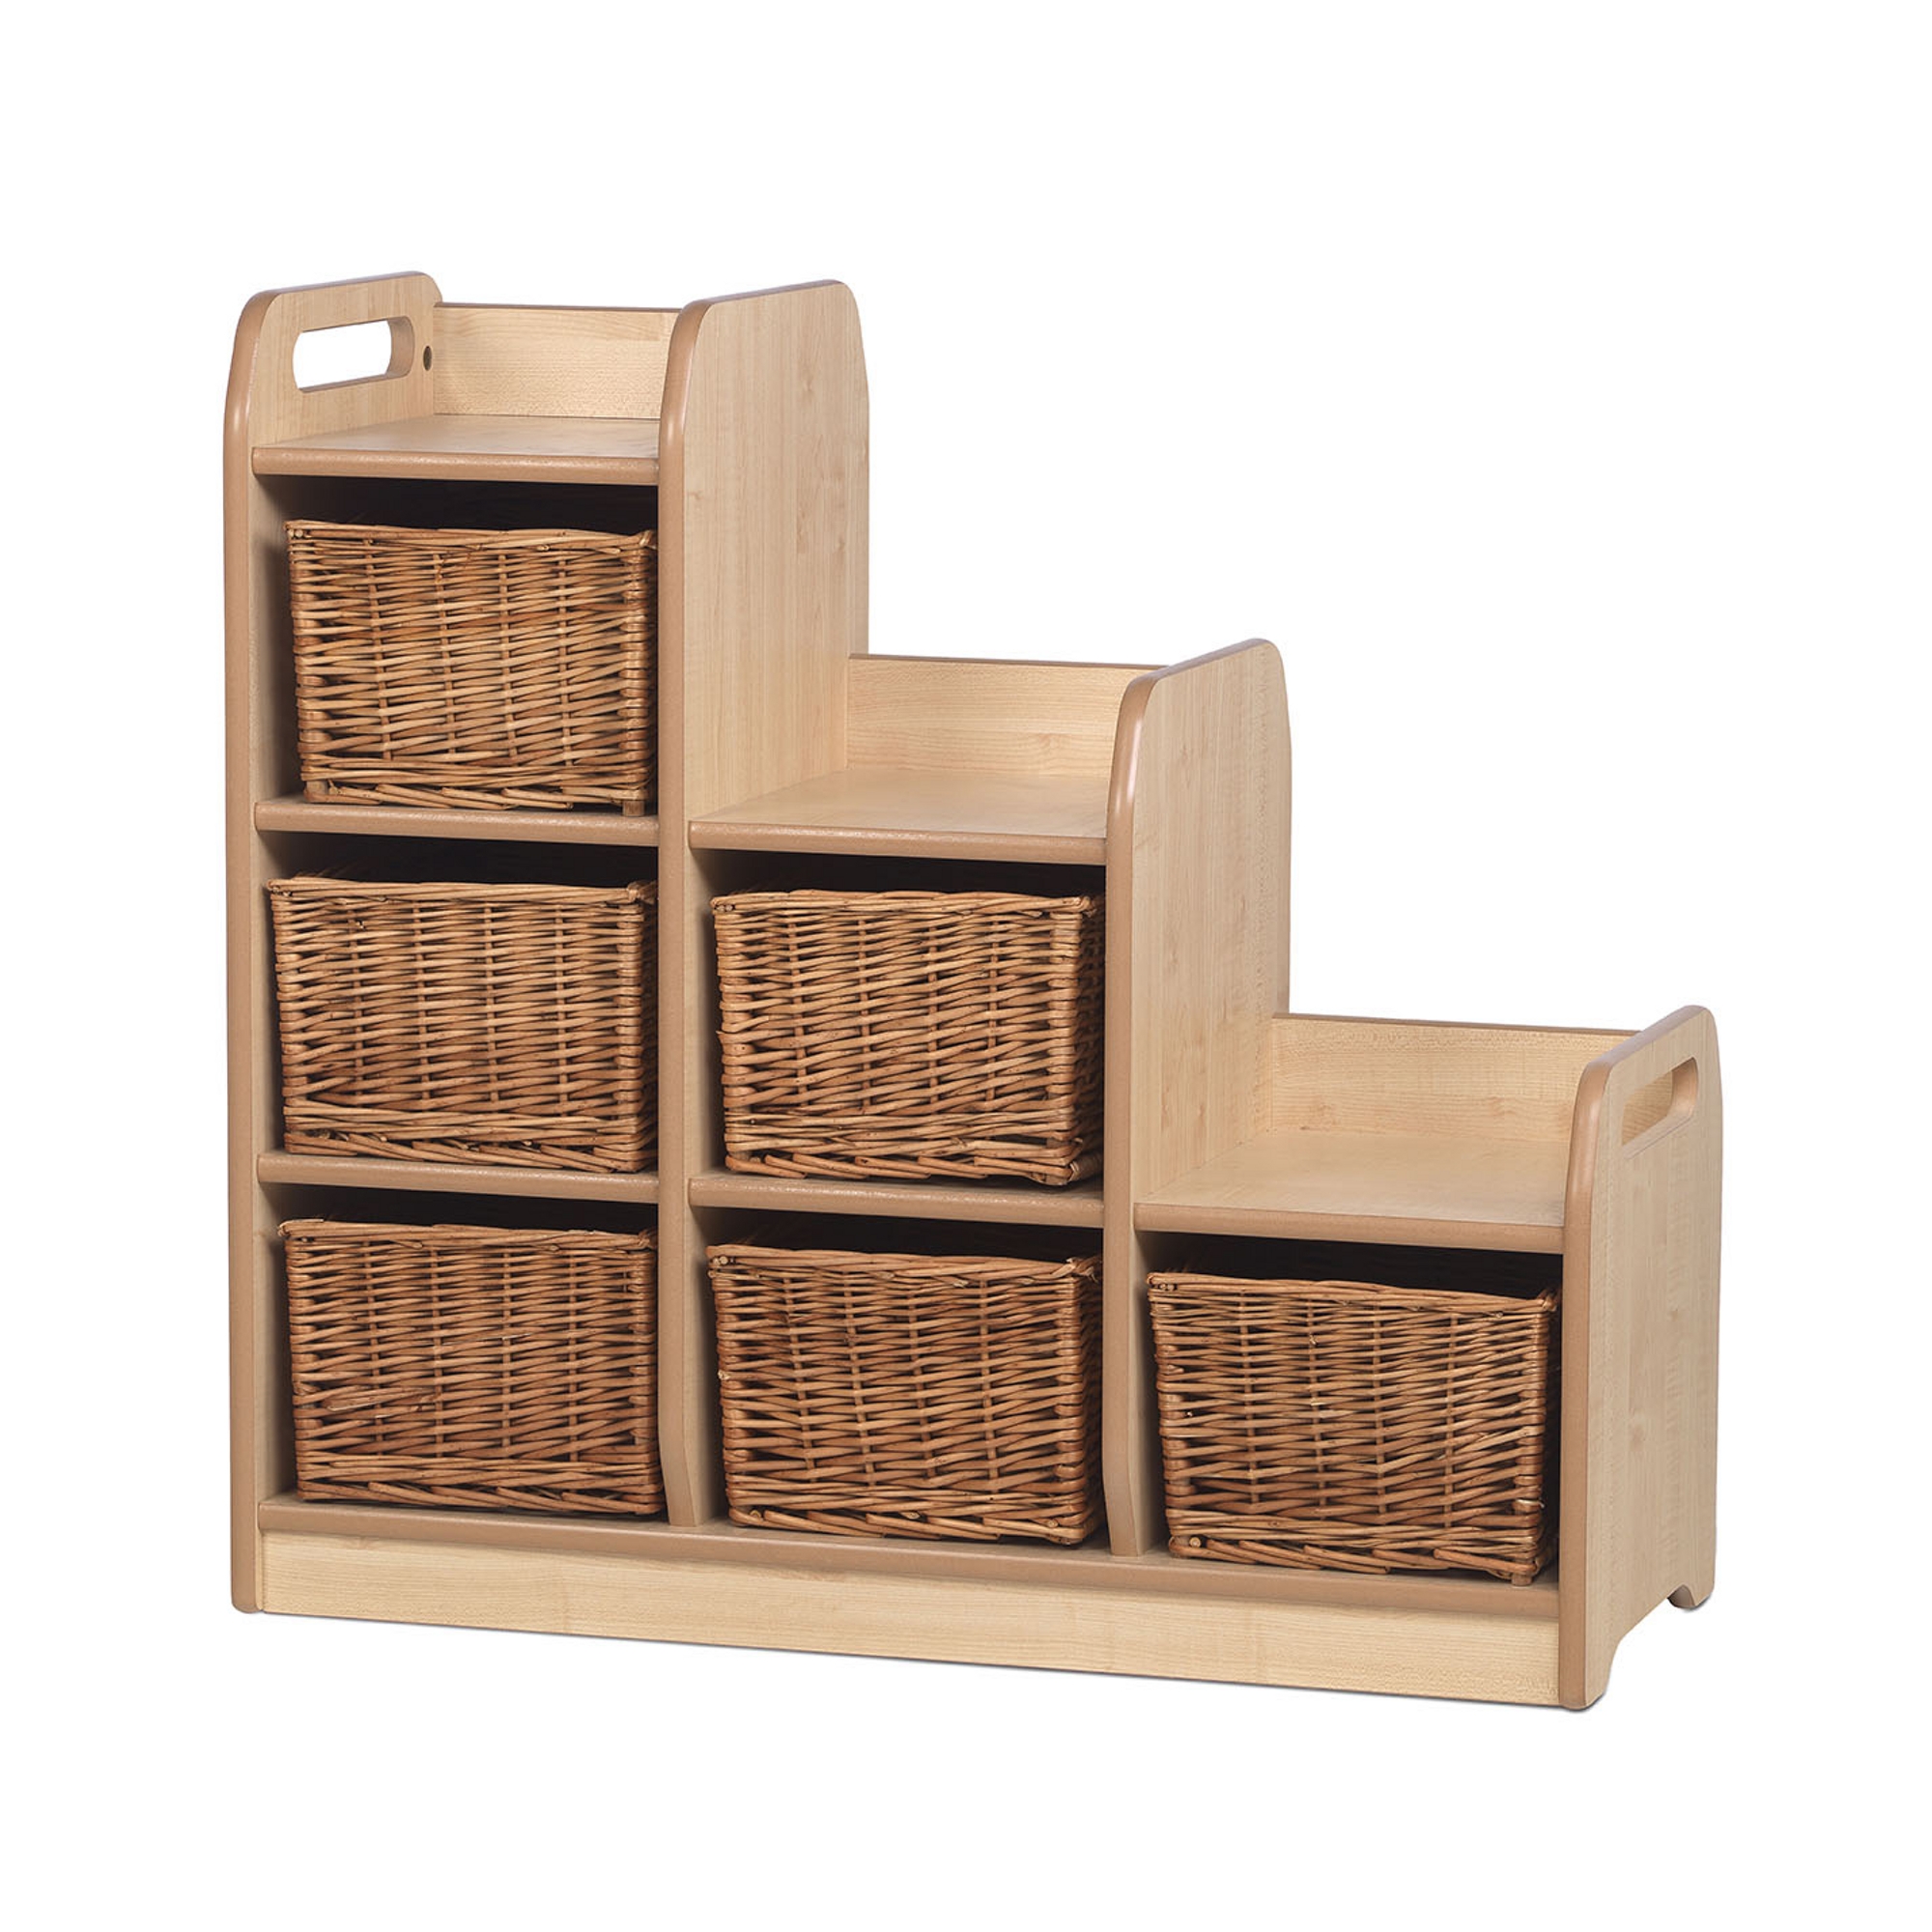 Playscapes Stepped Storage Unit - Left - Wicker Baskets